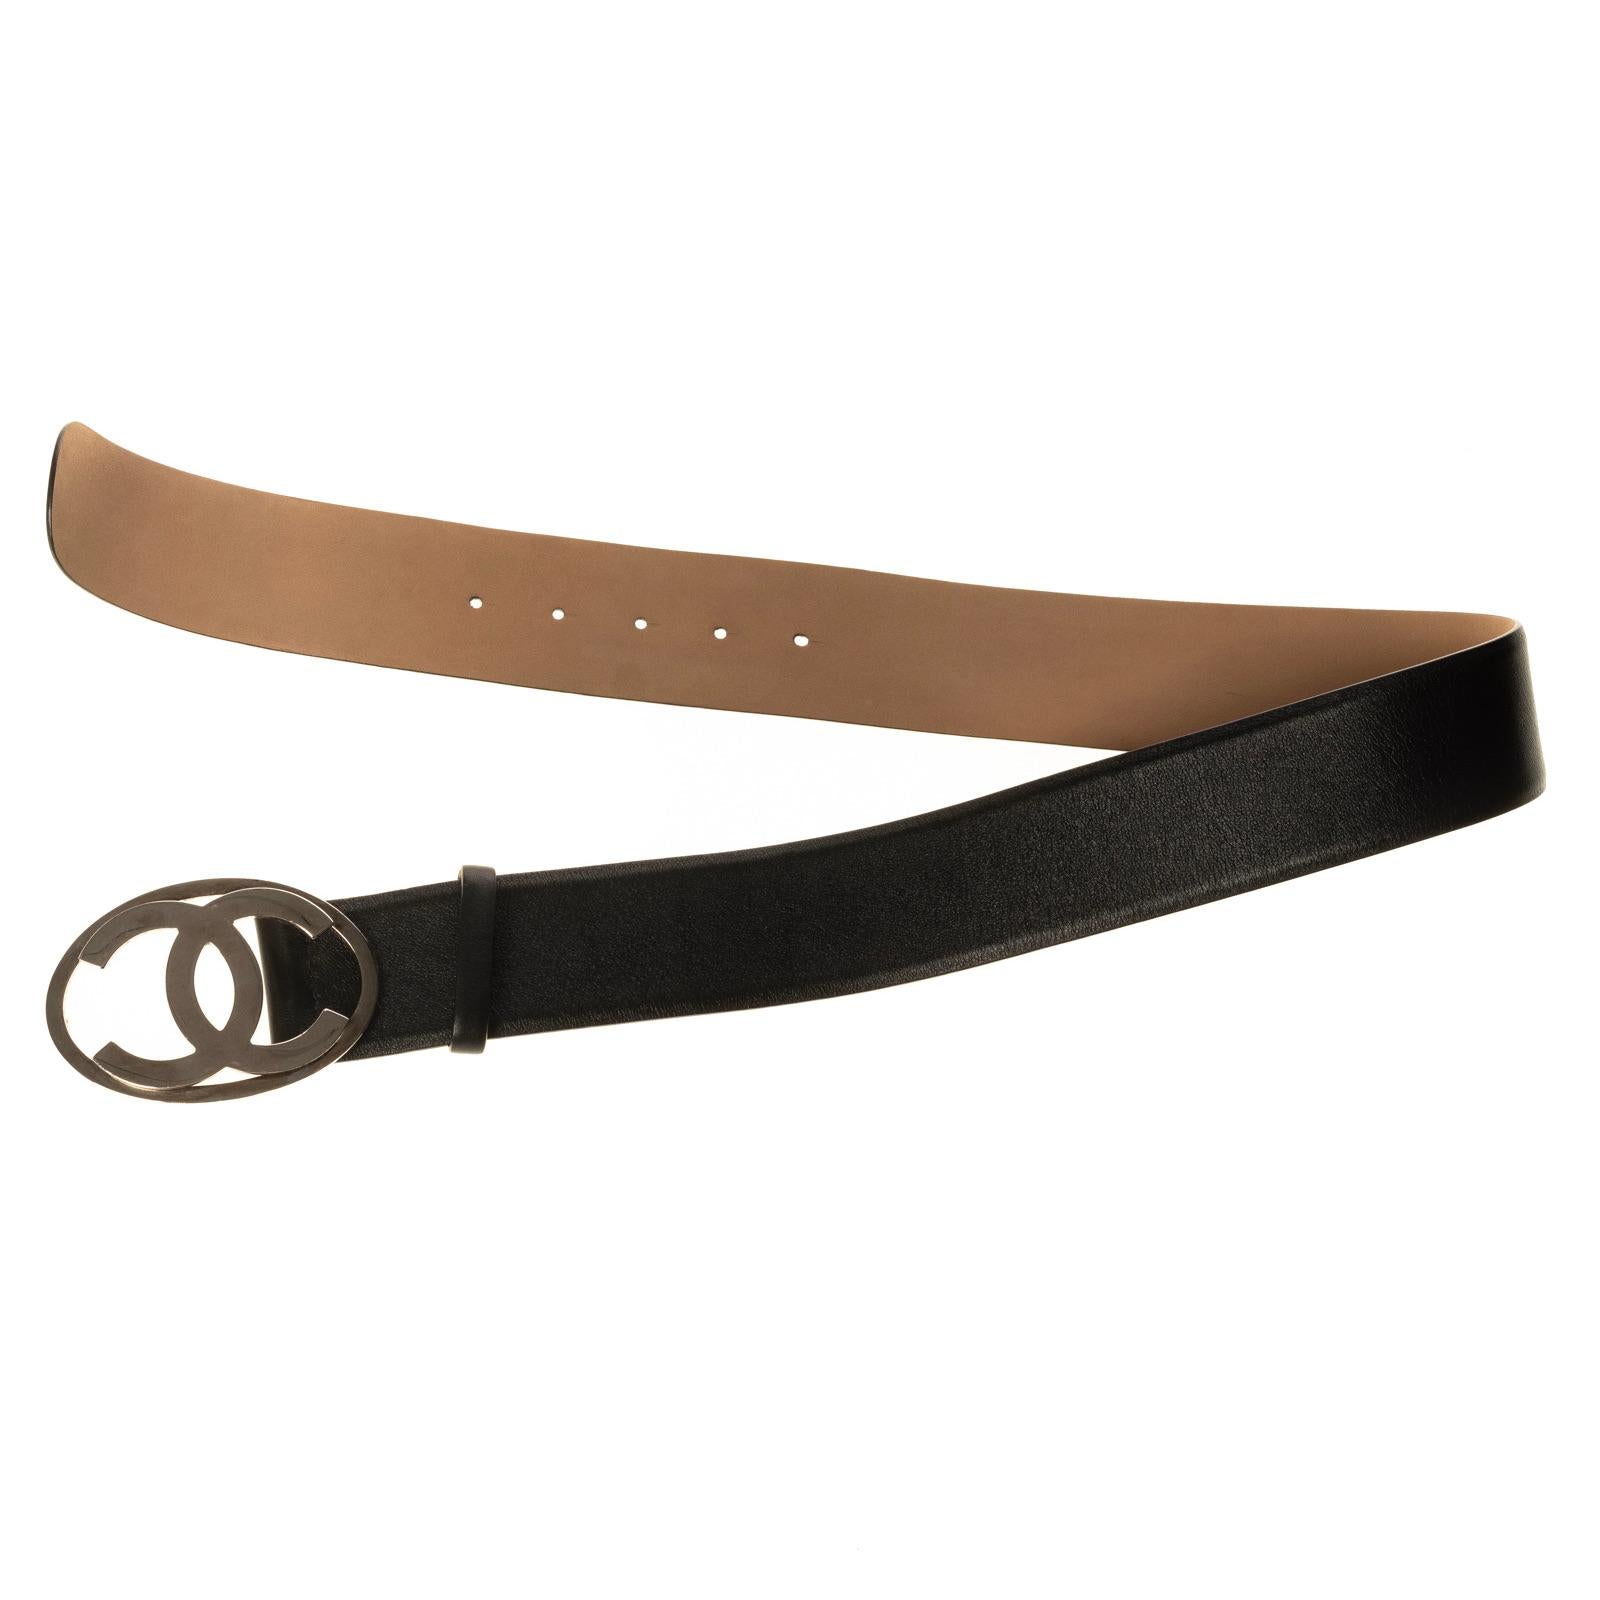 This belt is made with black calfskin leather and features the iconic CC logo on the buckle. Fall-Winter Collection 2006.

COLOR: Black
MATERIAL: Calfskin leather
ITEM CODE: B12
MEASURES: L 36” x W 1.75”
SIZE: 75 cm / 30 inch
COMES WITH: Dust bag